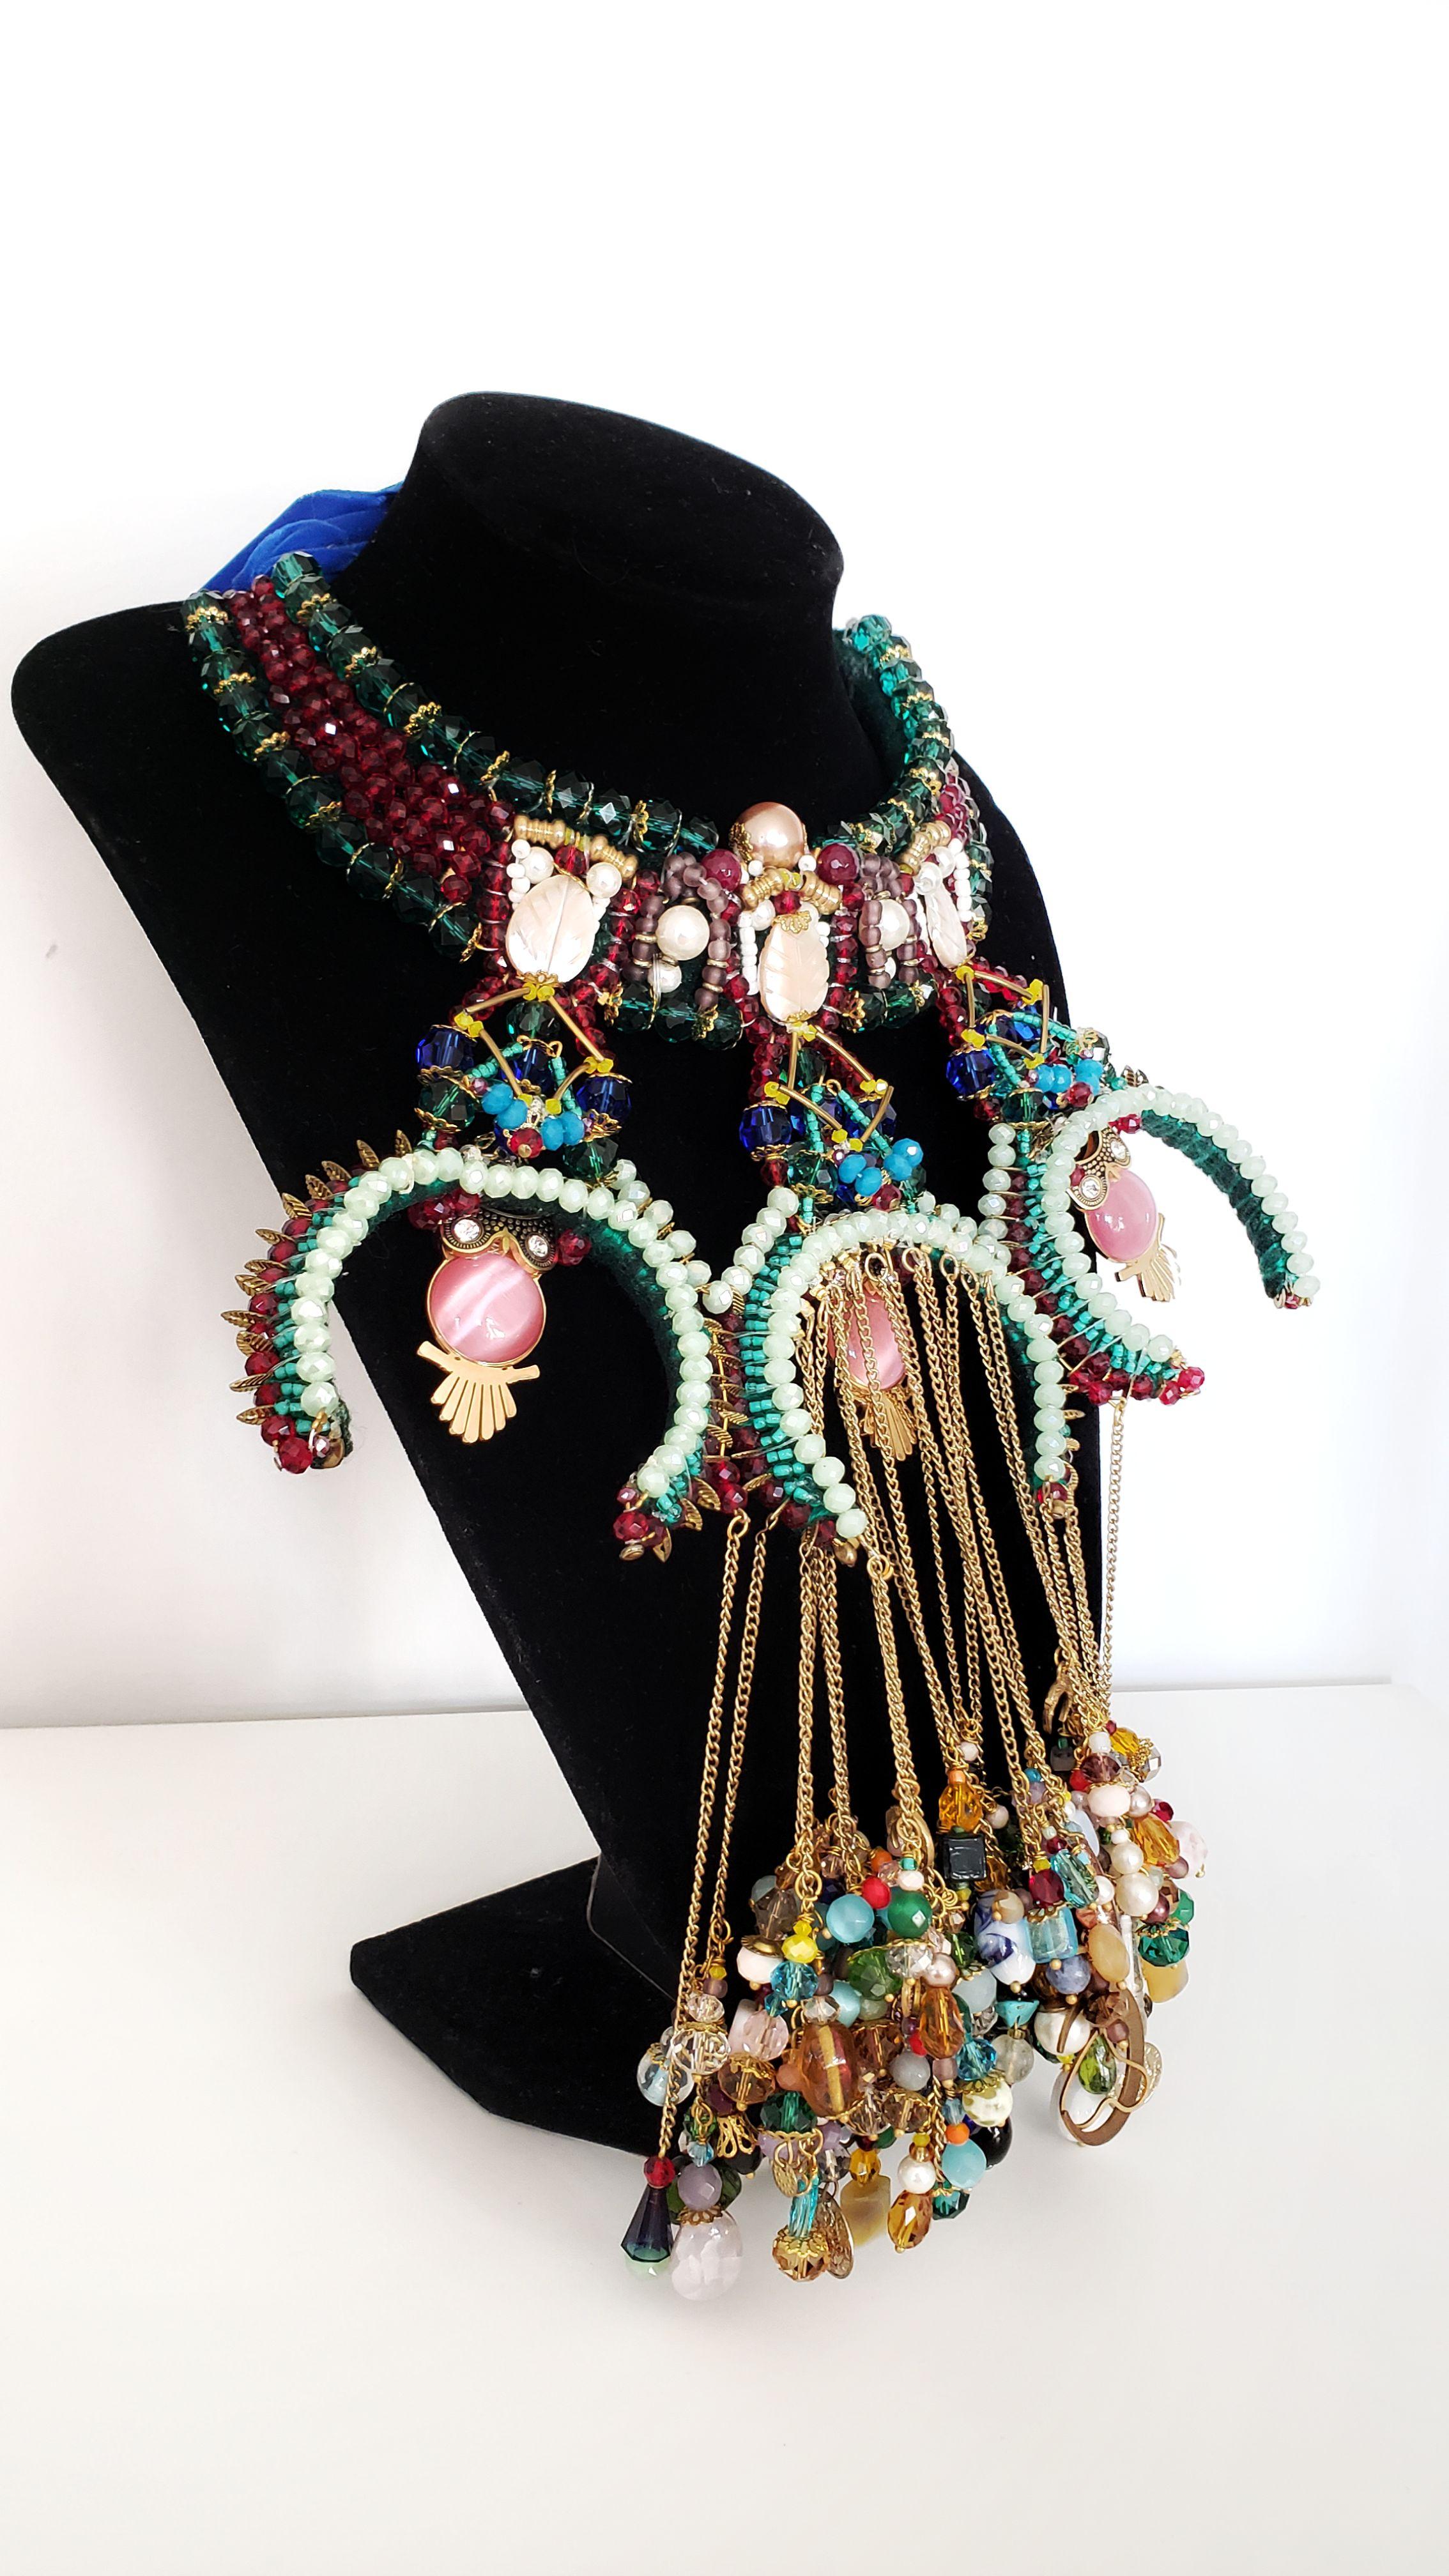 A striking combination of glamour and sophistication, this elegant one-of-a-kind handmade beaded embellished chain tassel bib collar necklace is a spellbinding statement and befitting companion for any night-time look.
Handcrafted with three owls